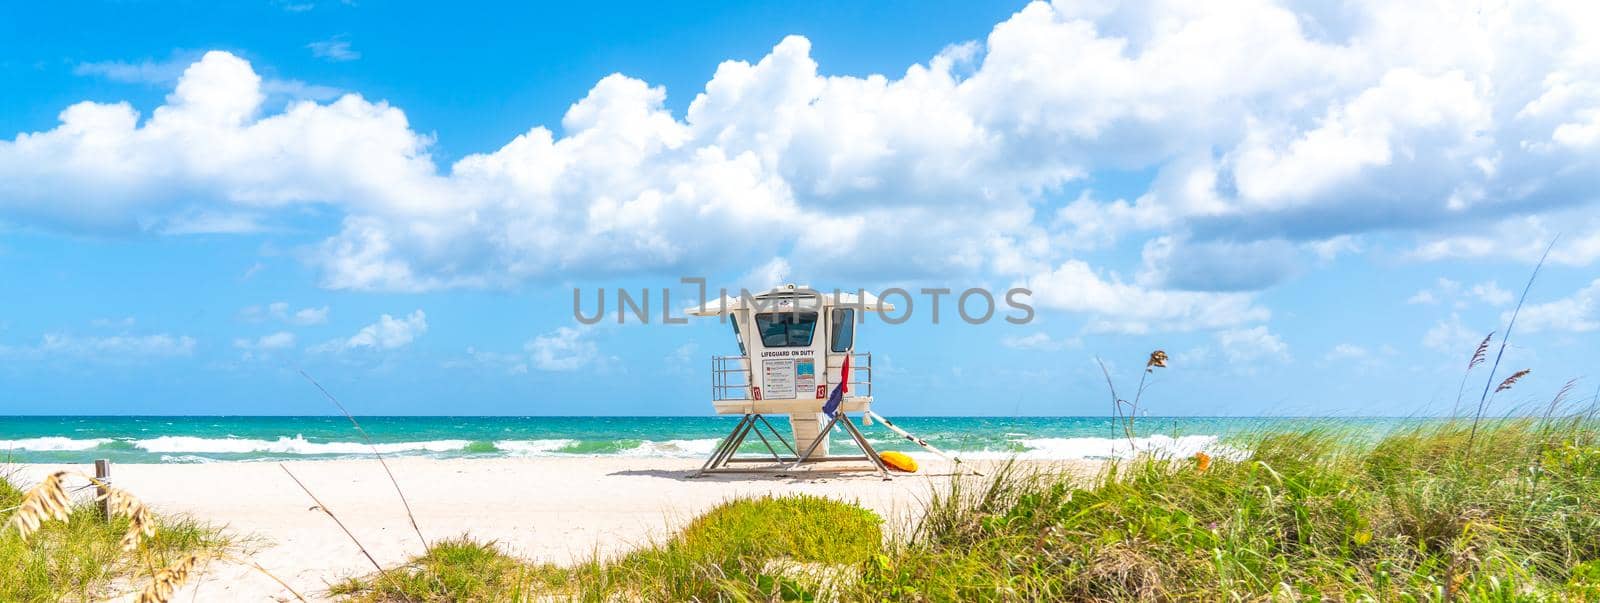 Fort Lauderdale, Florida, USA - September 20, 2019: Seafront beach promenade with palm trees